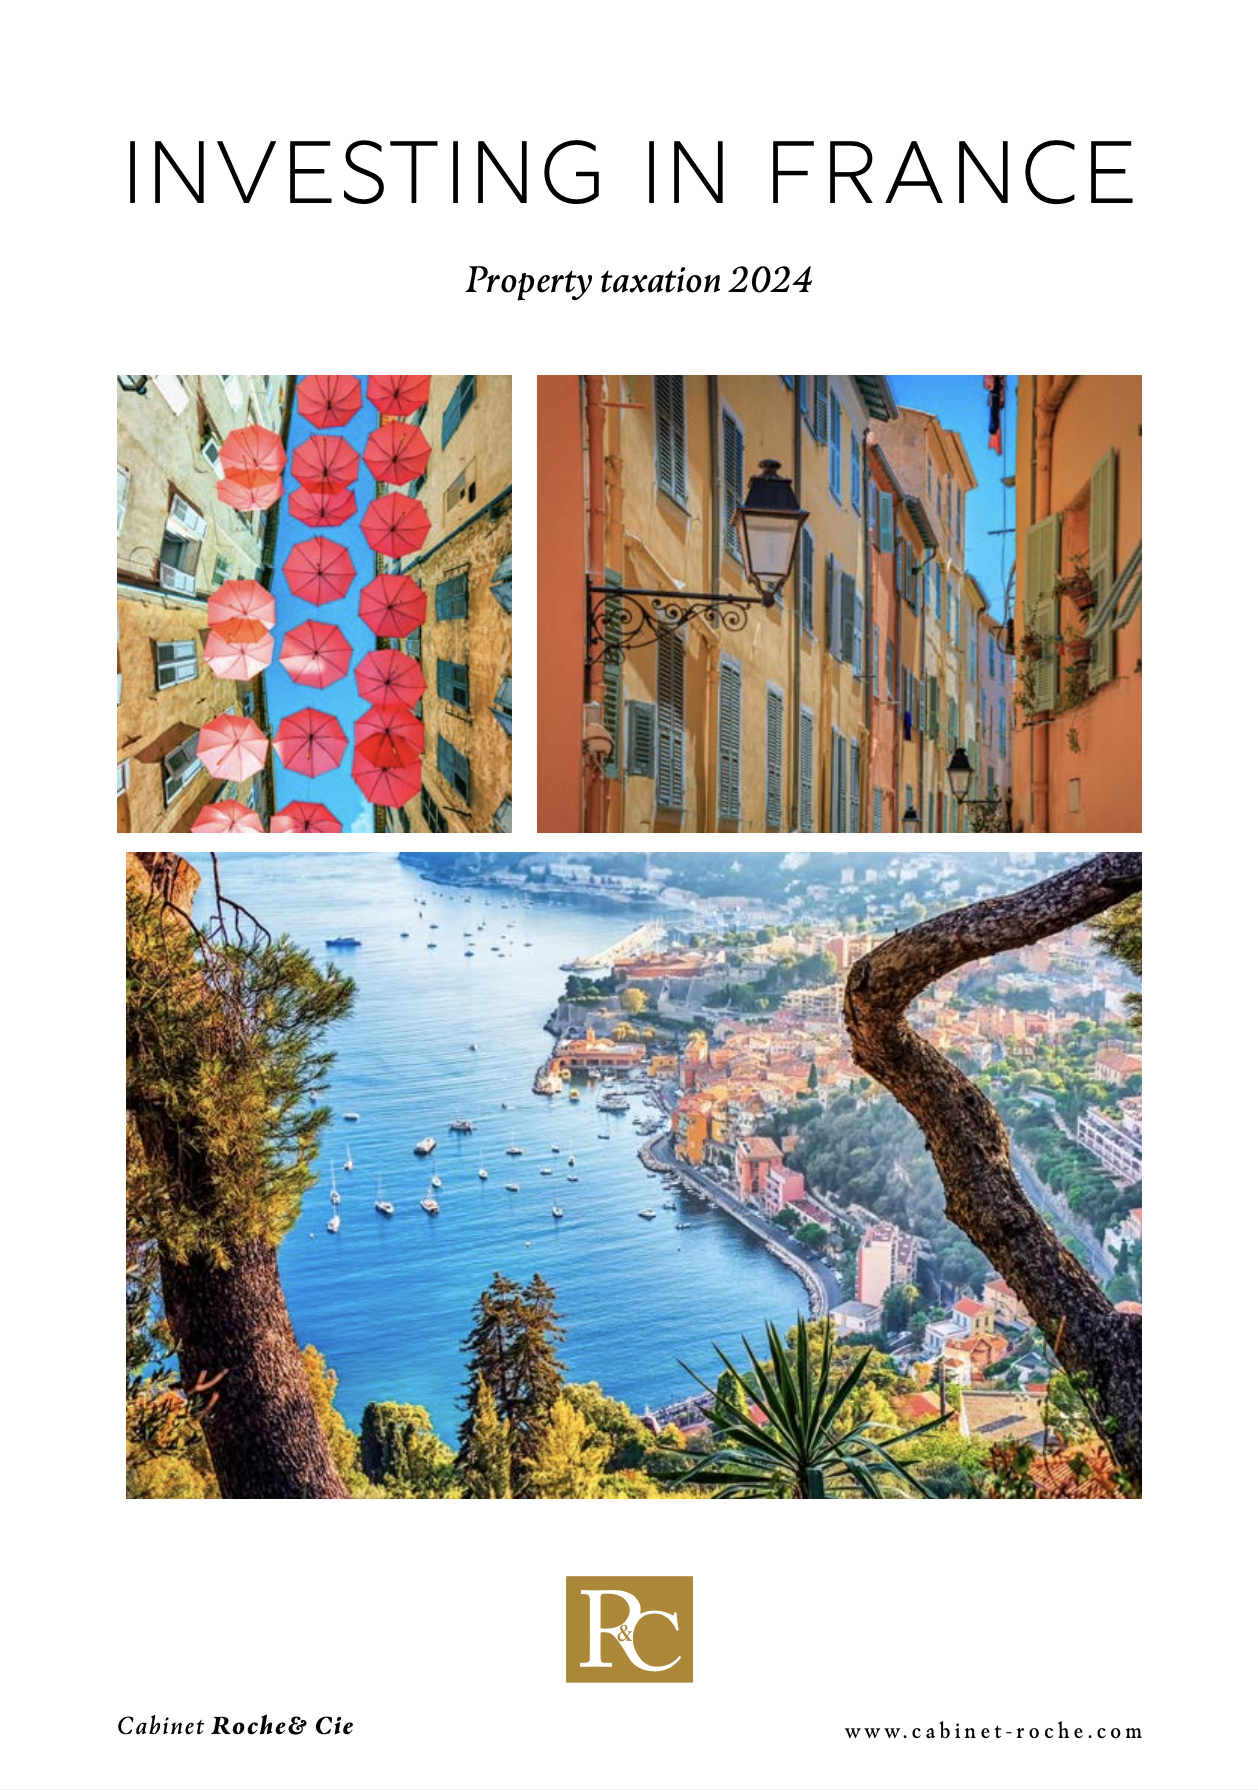 ACQUISITION AND TAXATION OF REAL ESTATE IN FRANCE • PRACTICAL GUIDE 2024